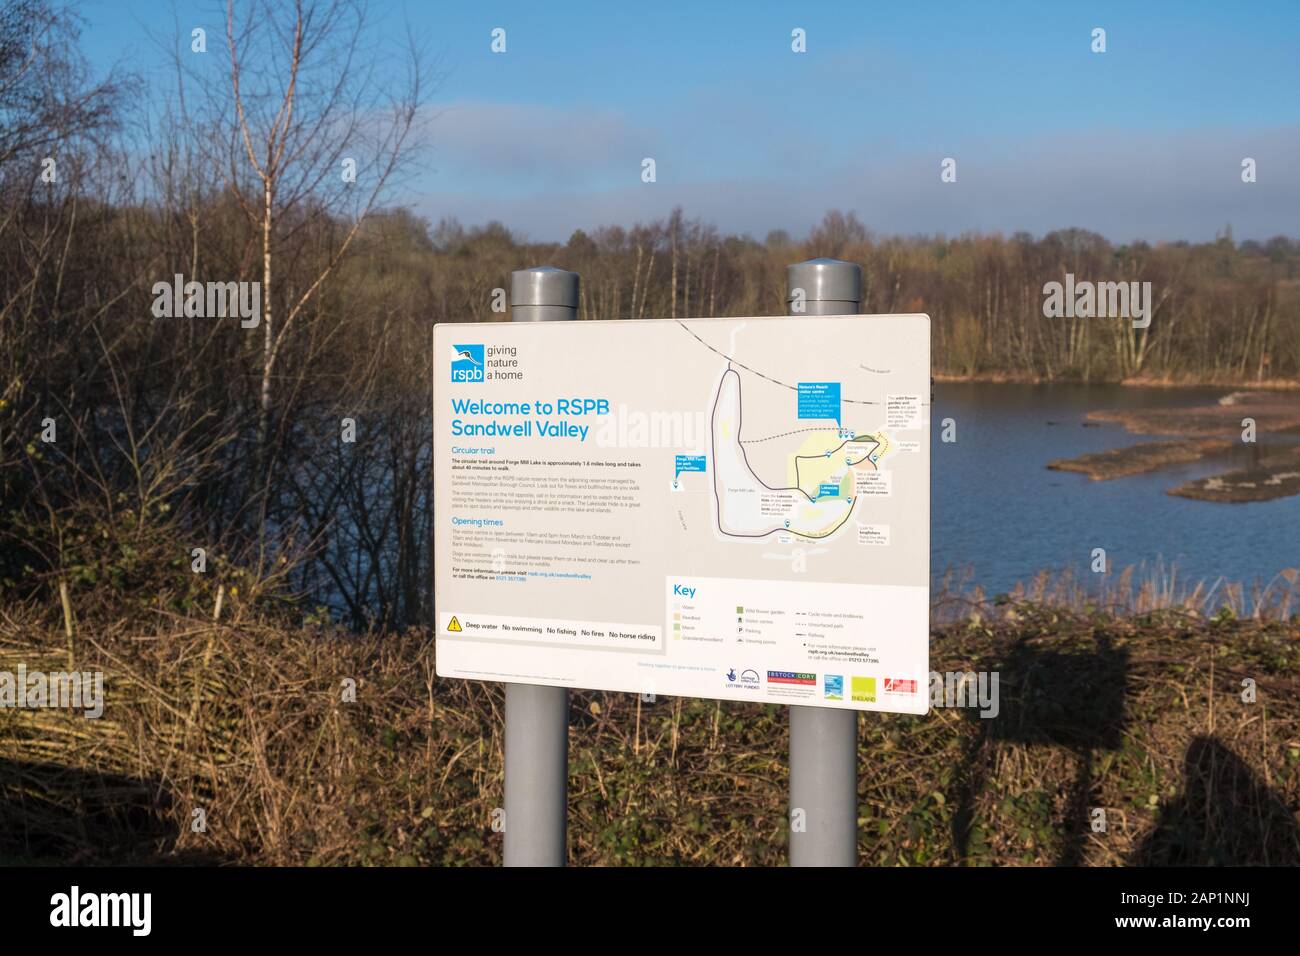 RSPB Sandwell Valley and Forge Mill Lake which forms part of Sandwell Valley Country Park in West Bromwich, West Midlands, UK Stock Photo